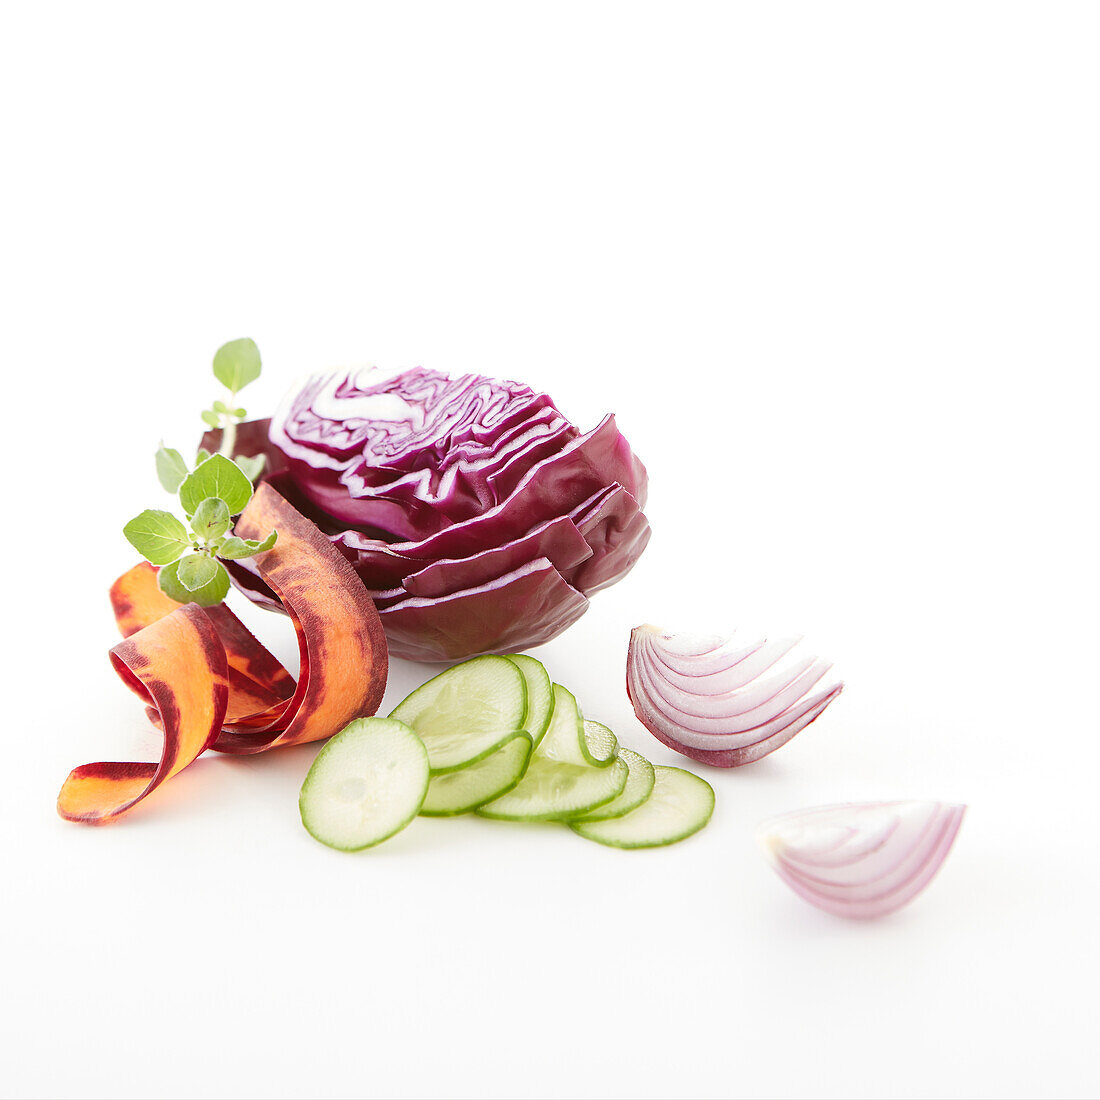 Red cabbage, cucumber, purple carrot and red onion